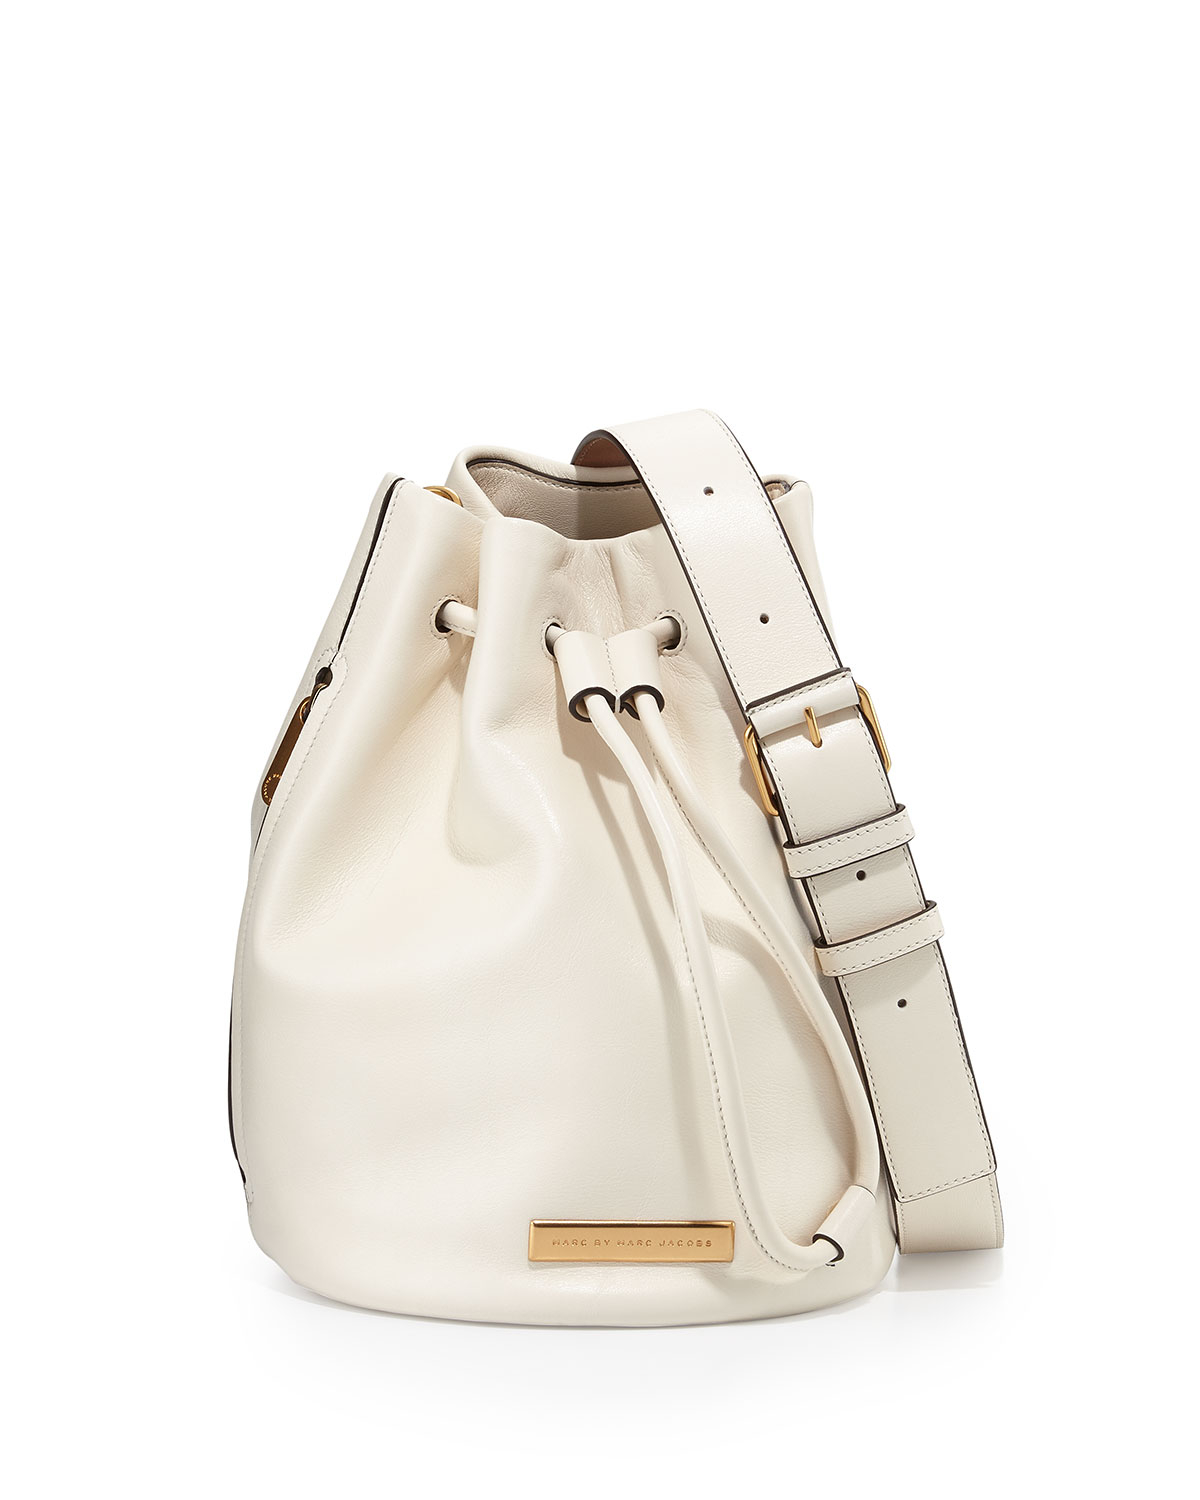 Lyst - Marc By Marc Jacobs Luna Leather Bucket Bag in White